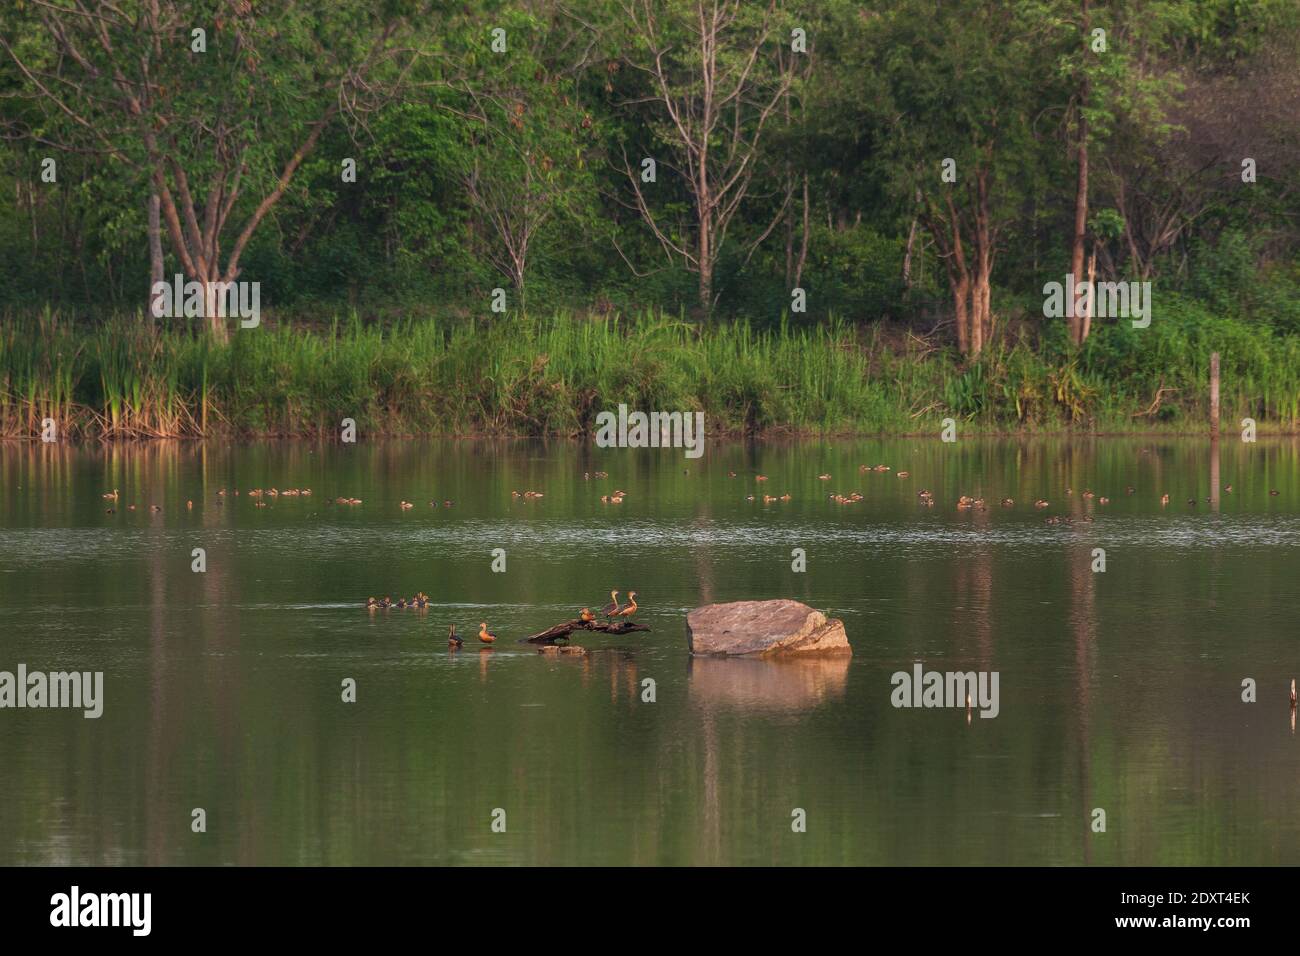 beautiful group of Lesser Whistling Duck on lake life and environment of rainforest nature background Stock Photo